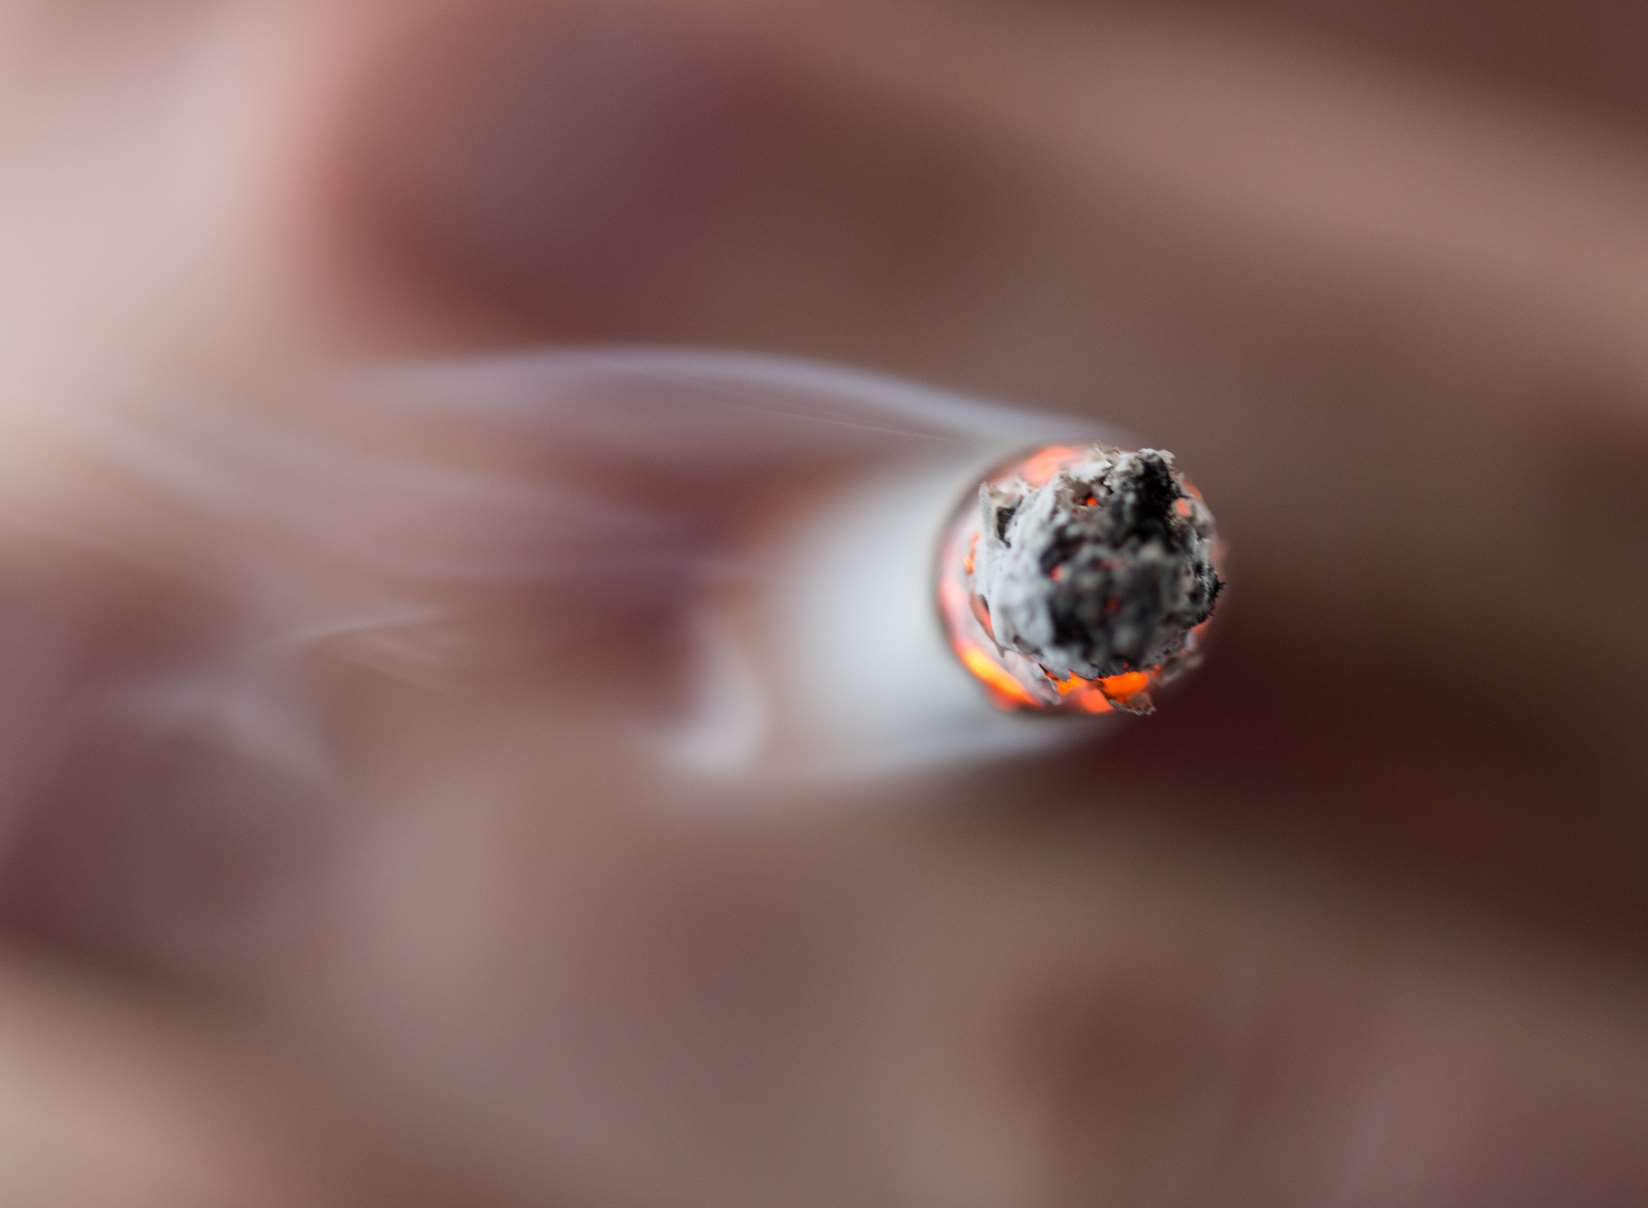 KCC's come under fire for investing in tobacco companies. Picture: Getty Images